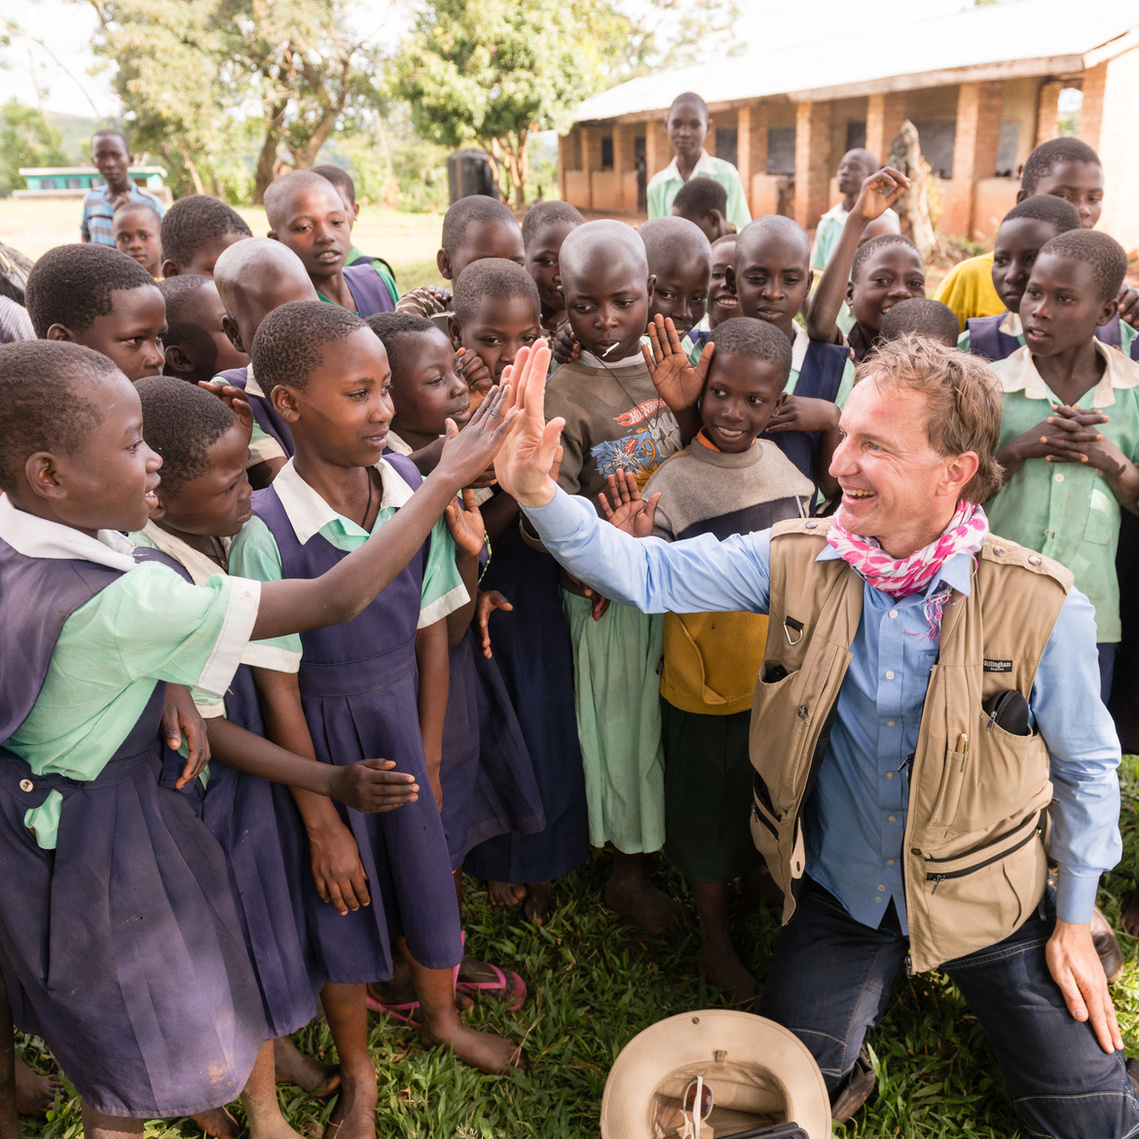 Shot on location, outside  whilst working on a eduction project for children in Uganda.
By the way, I have eight of those vests, I bought all remaining stock, when Billingham finished production, so if you see me wearing on, it is clean.